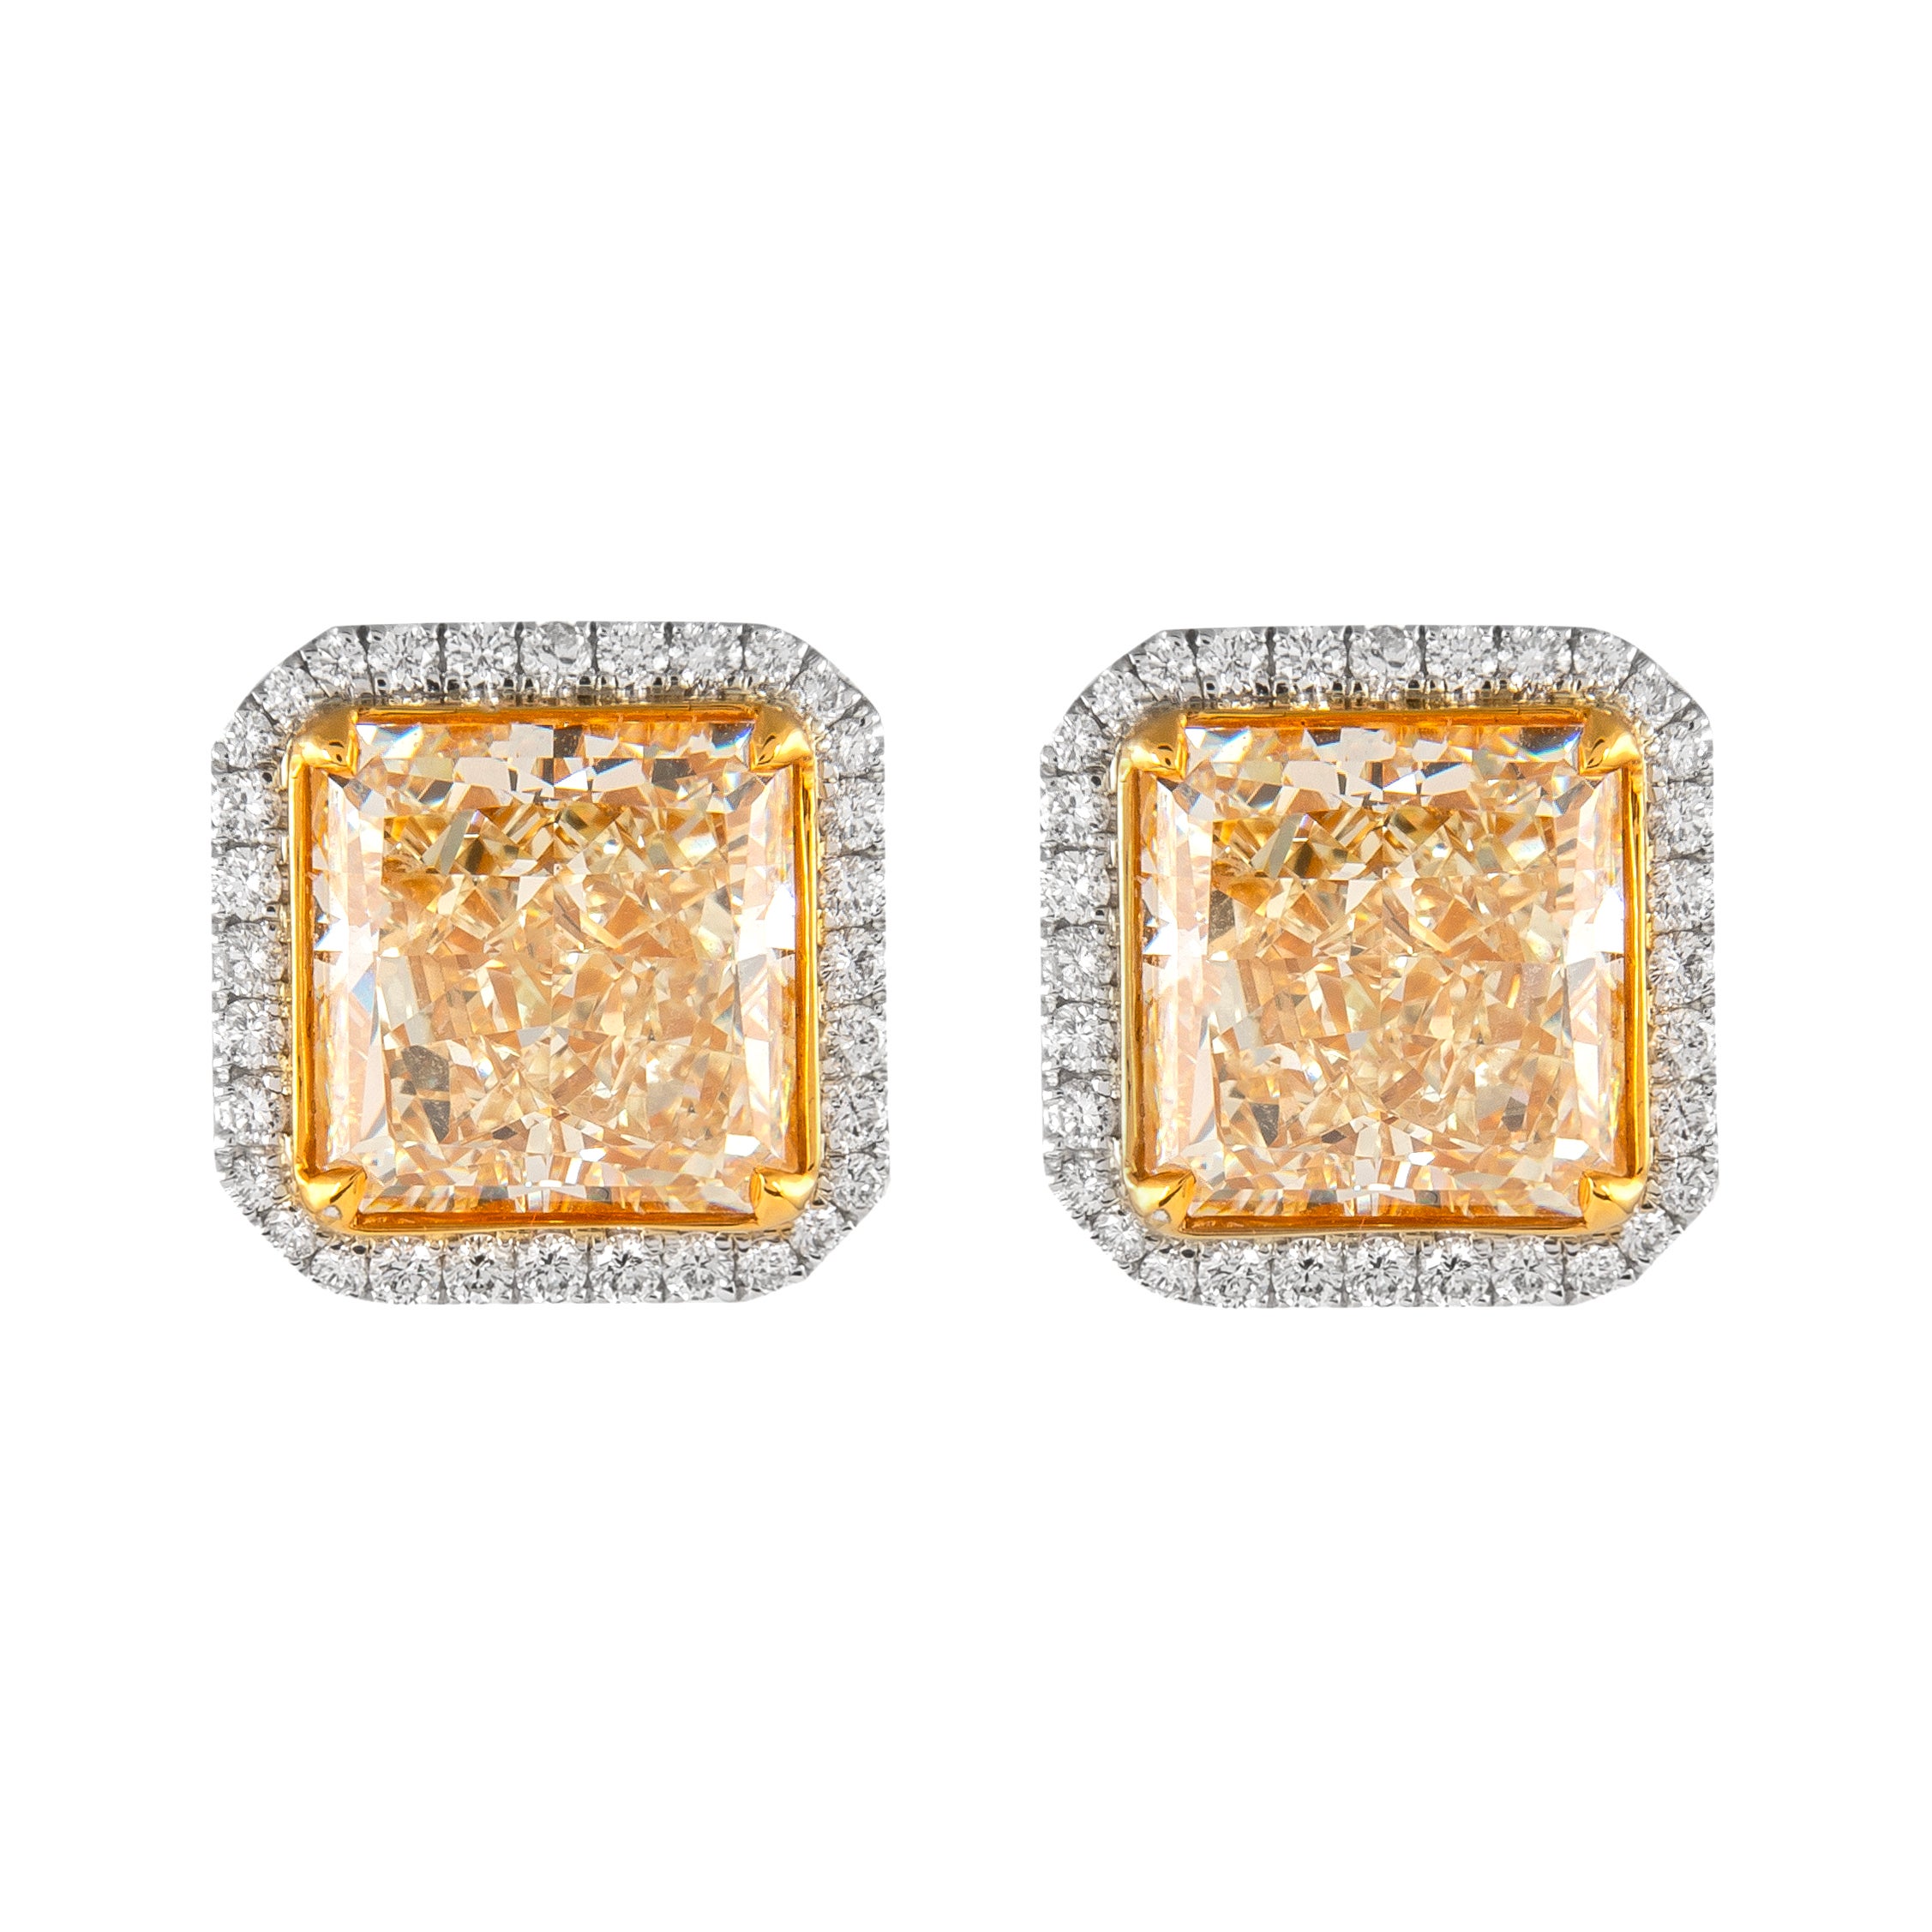 Alexander Beverly Hills 12.84ct Fancy Yellow Diamond Stud Earrings with Halo 18k For Sale